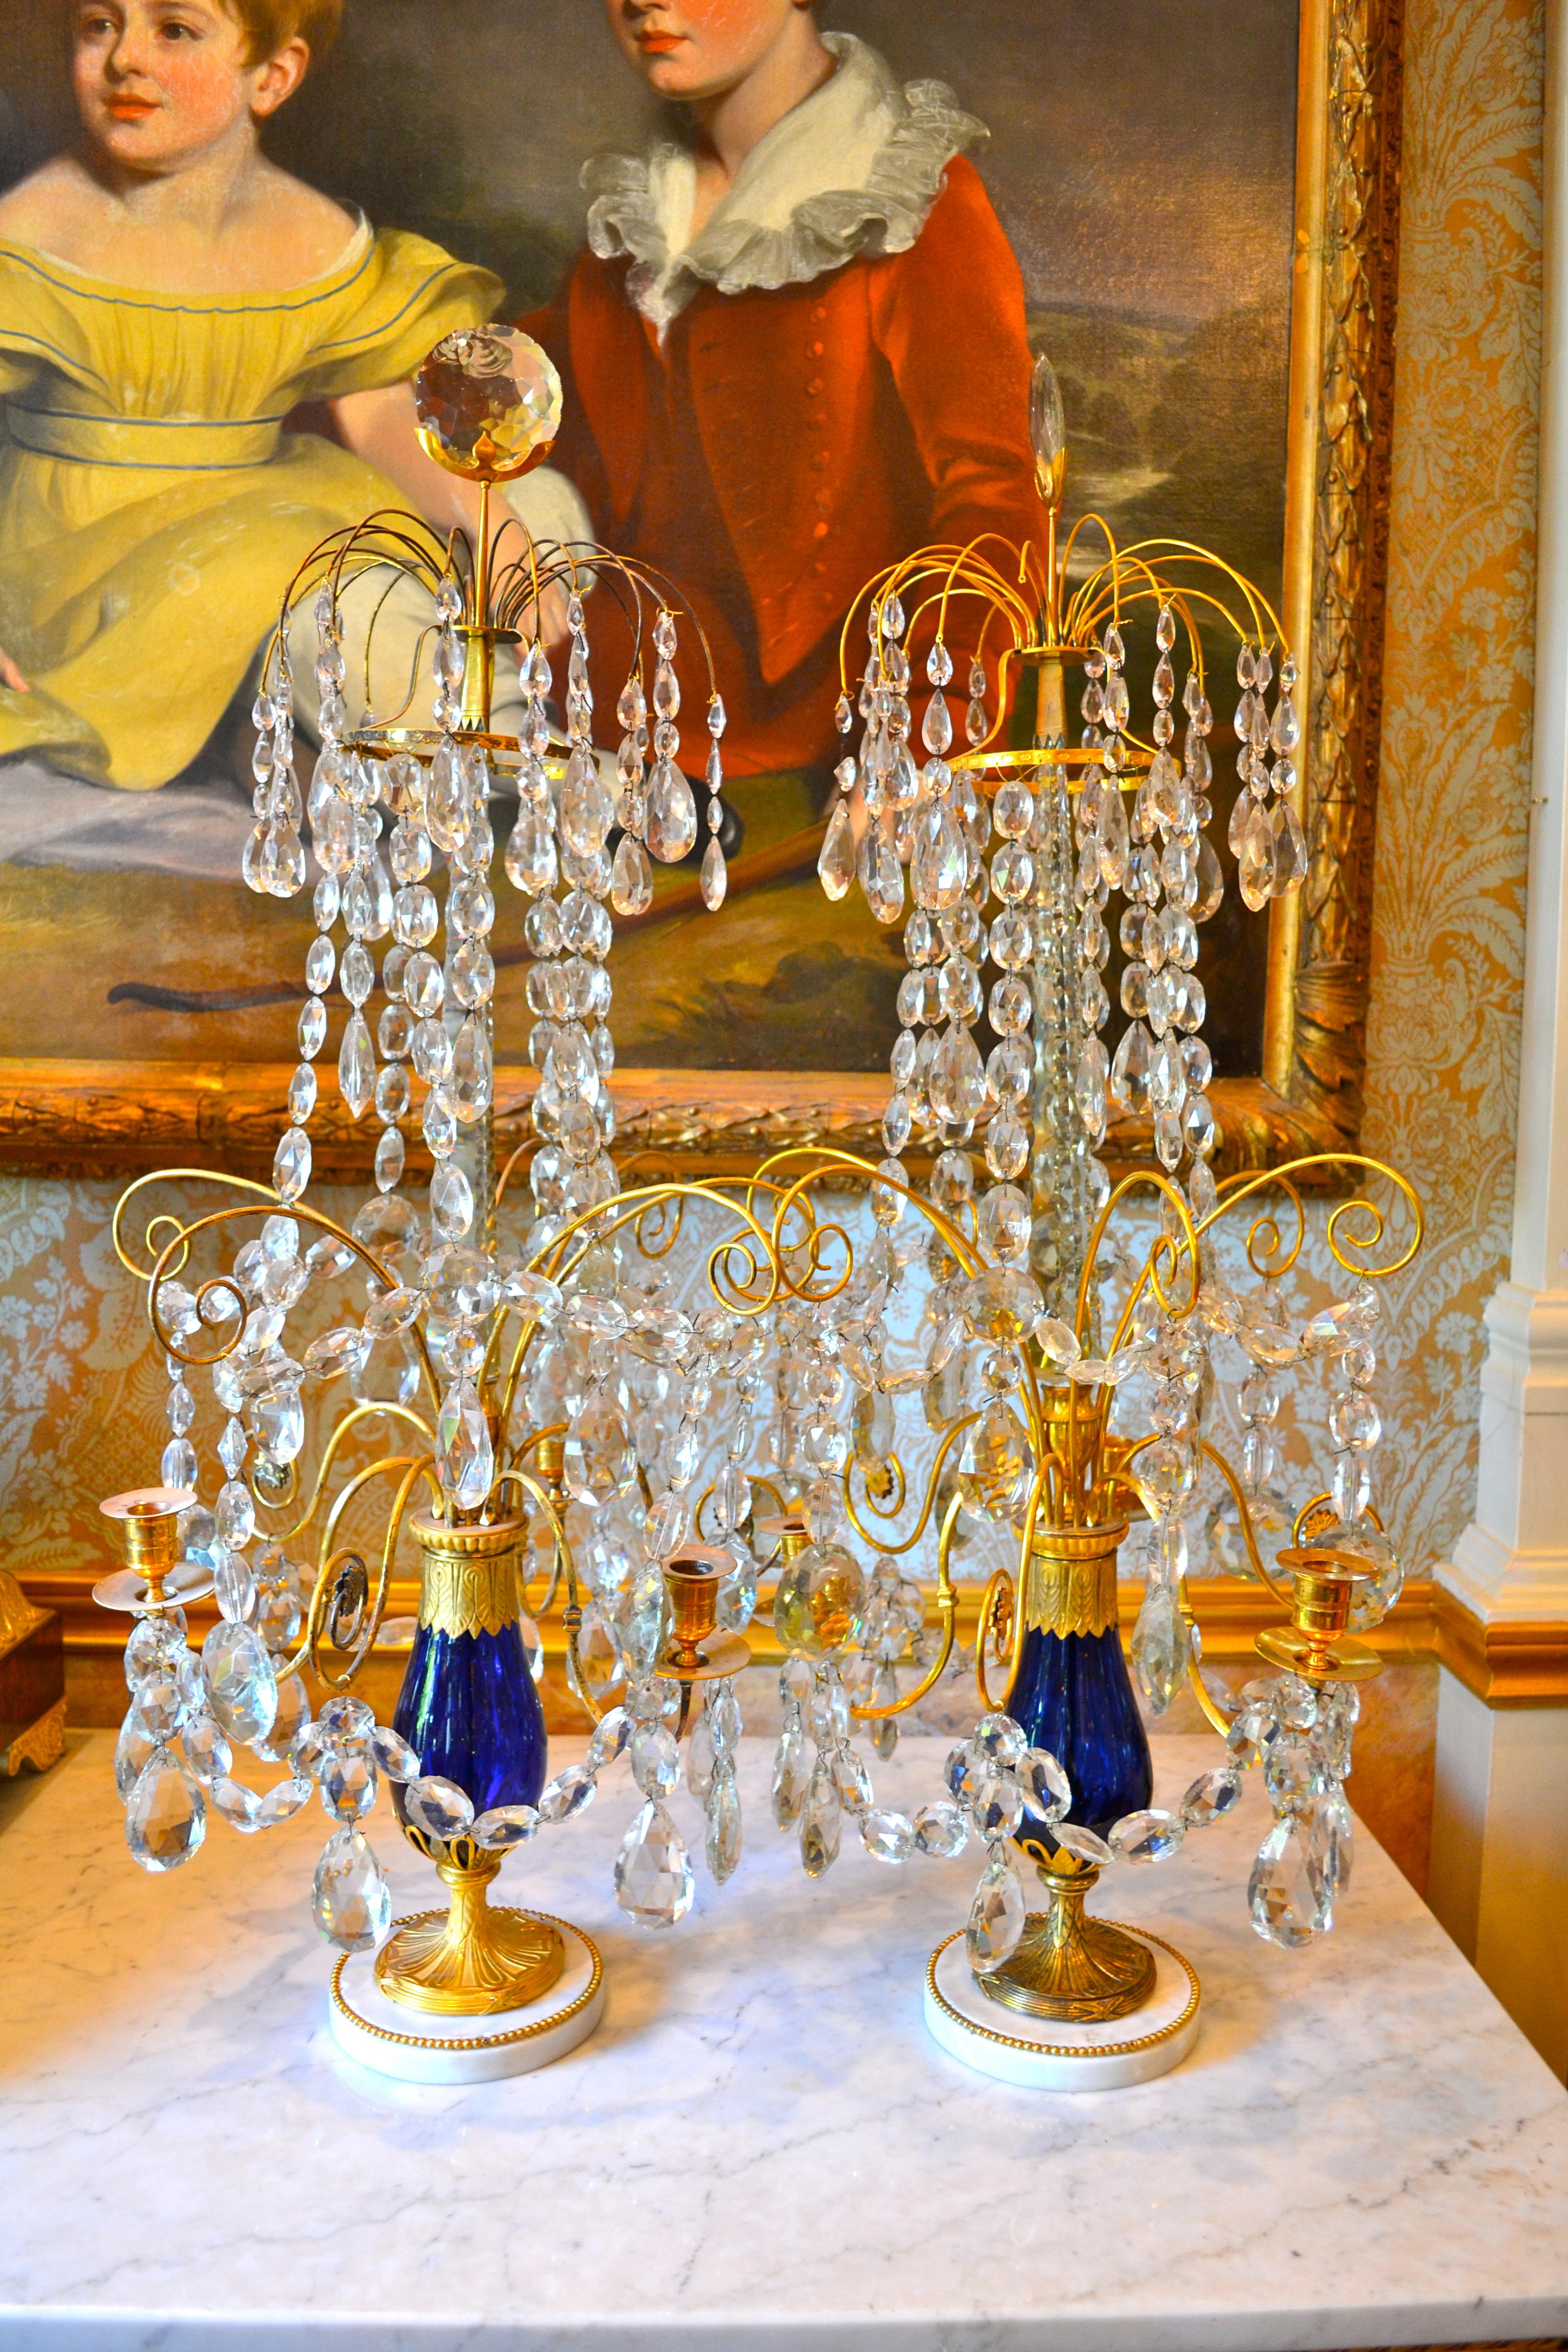 A pair of very rare exquisite Imperial Russian crystal girandoles, each with five scrolling candle branches set in a cobalt blue glass baluster vase mounted in gilt bronze, the central faceted obelisk supports original crystals and chains, the whole